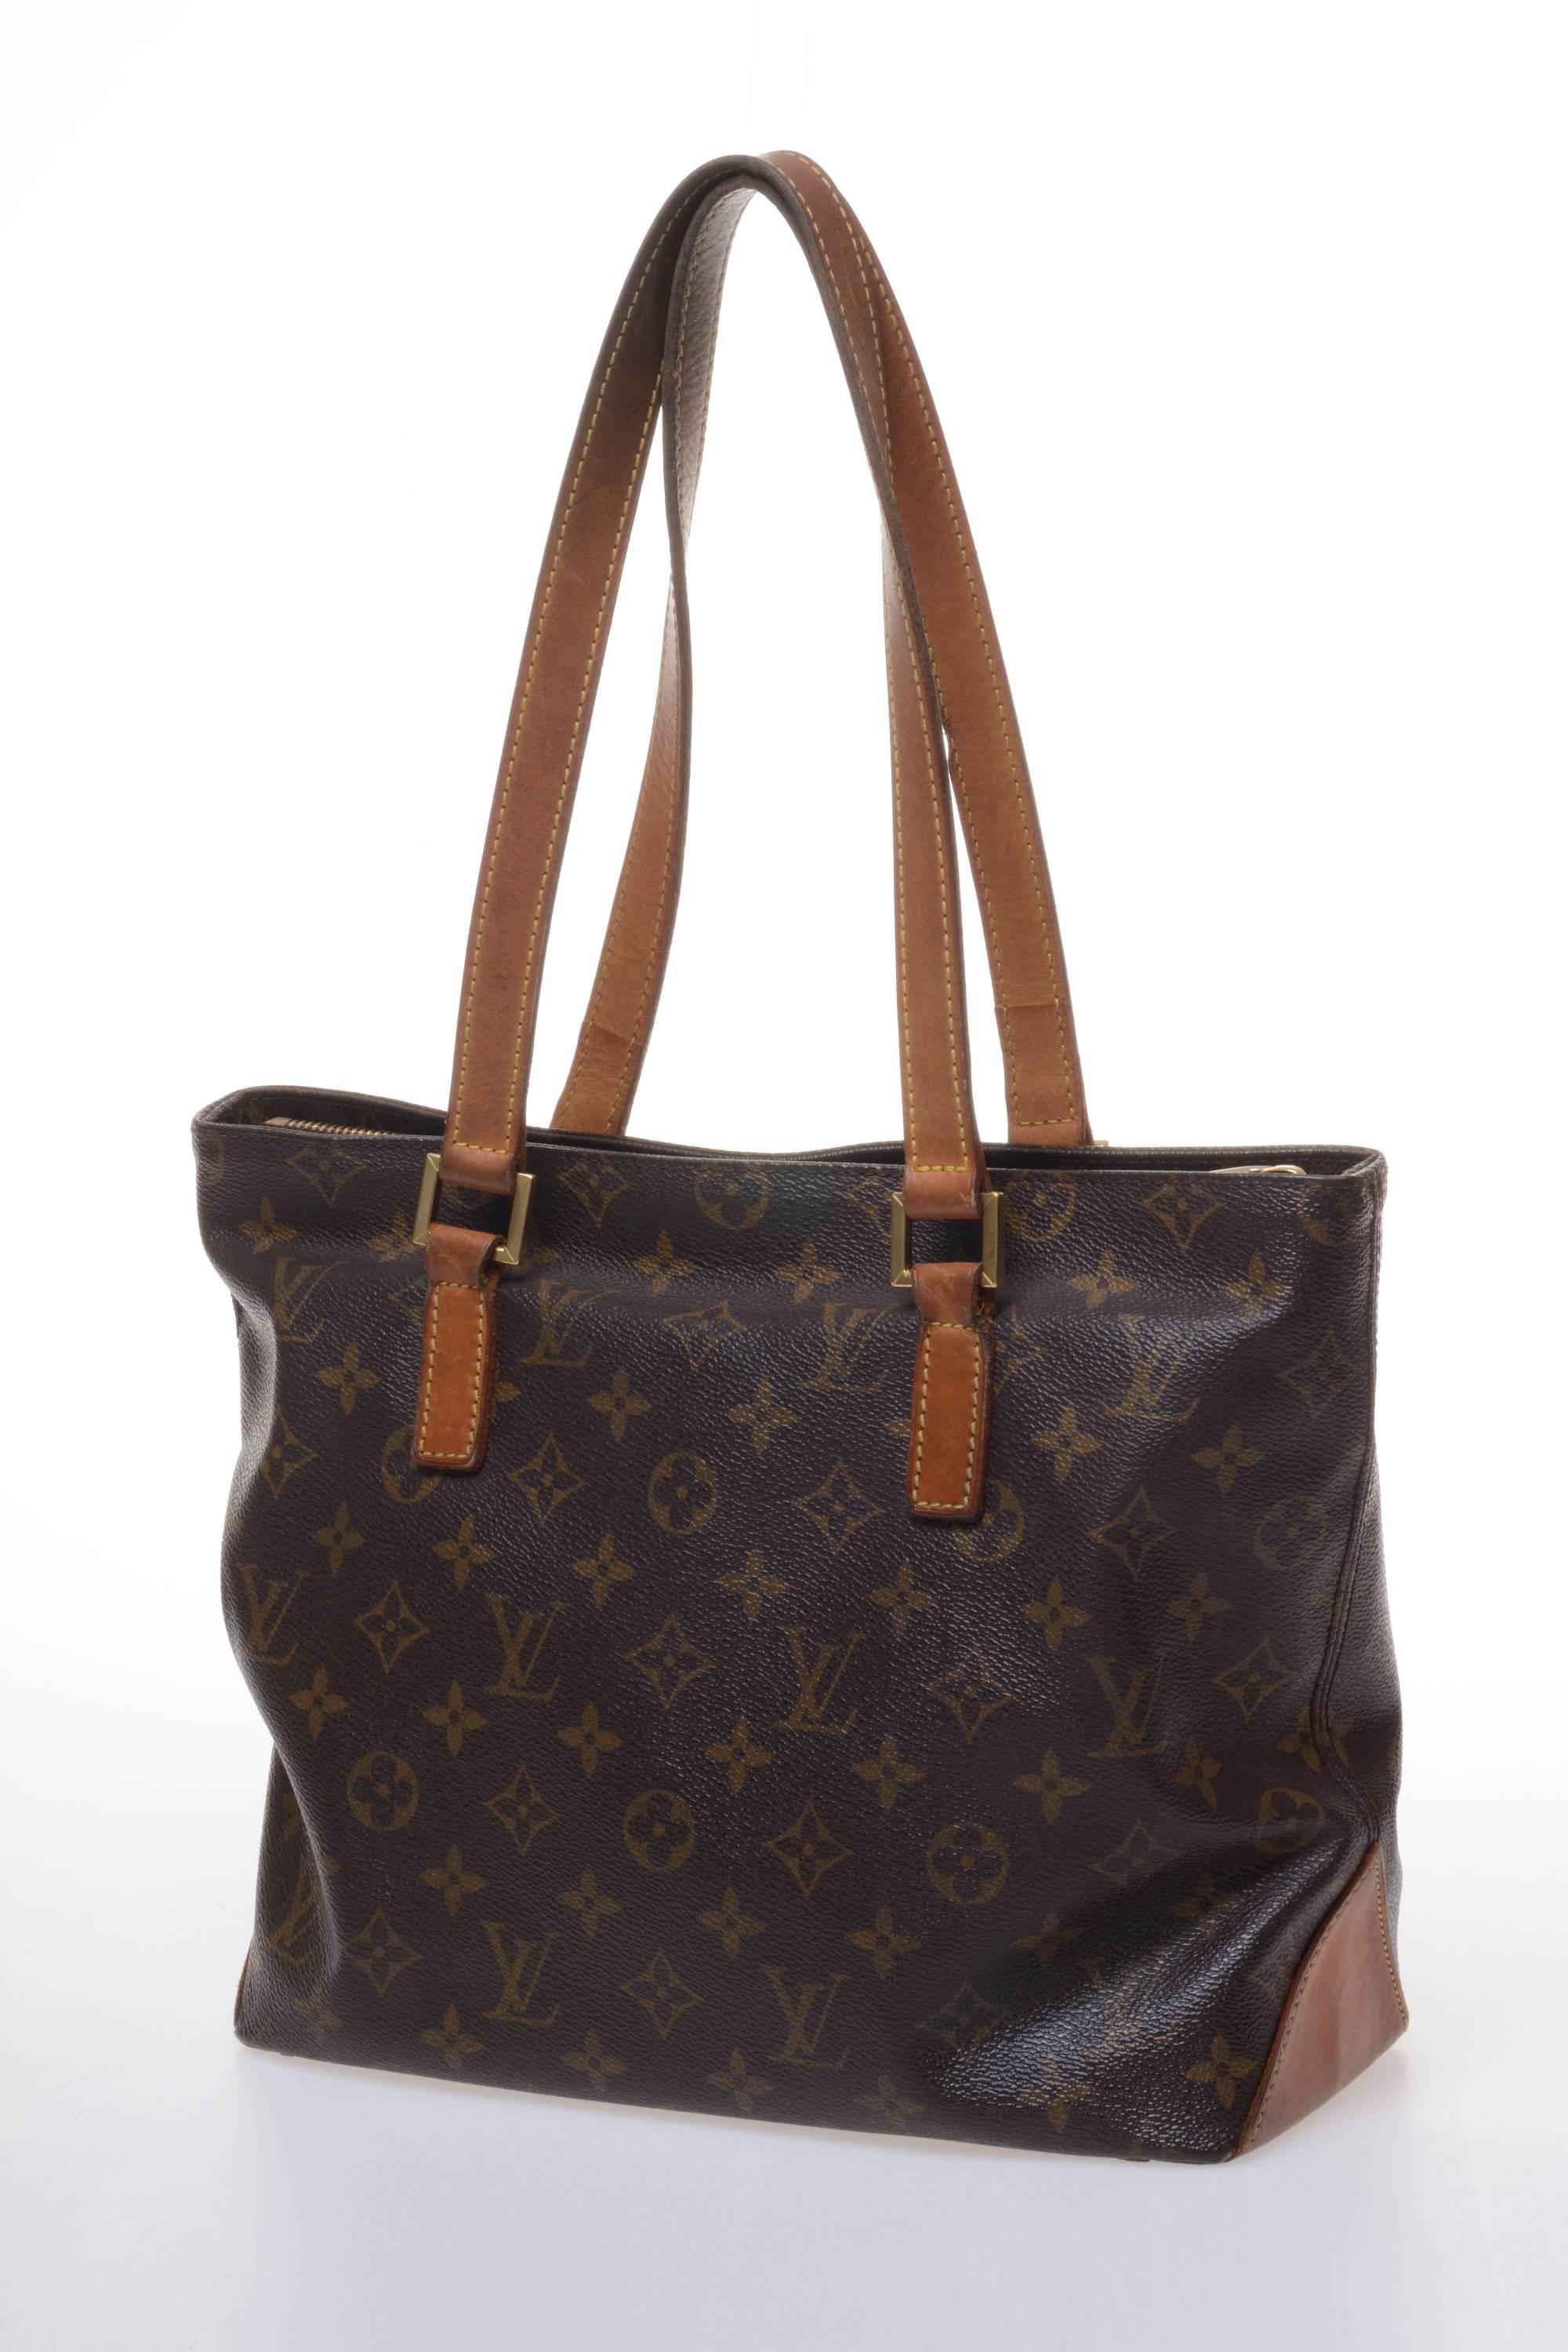 This handbag by LOUIS VUITTON has the monogram print and 1970s shape style, a pocket inside with zip closure, a cell phone pocket and a ring-keys, and old gold details such as the square handle attachment. It is fully lined in cotton, and strong